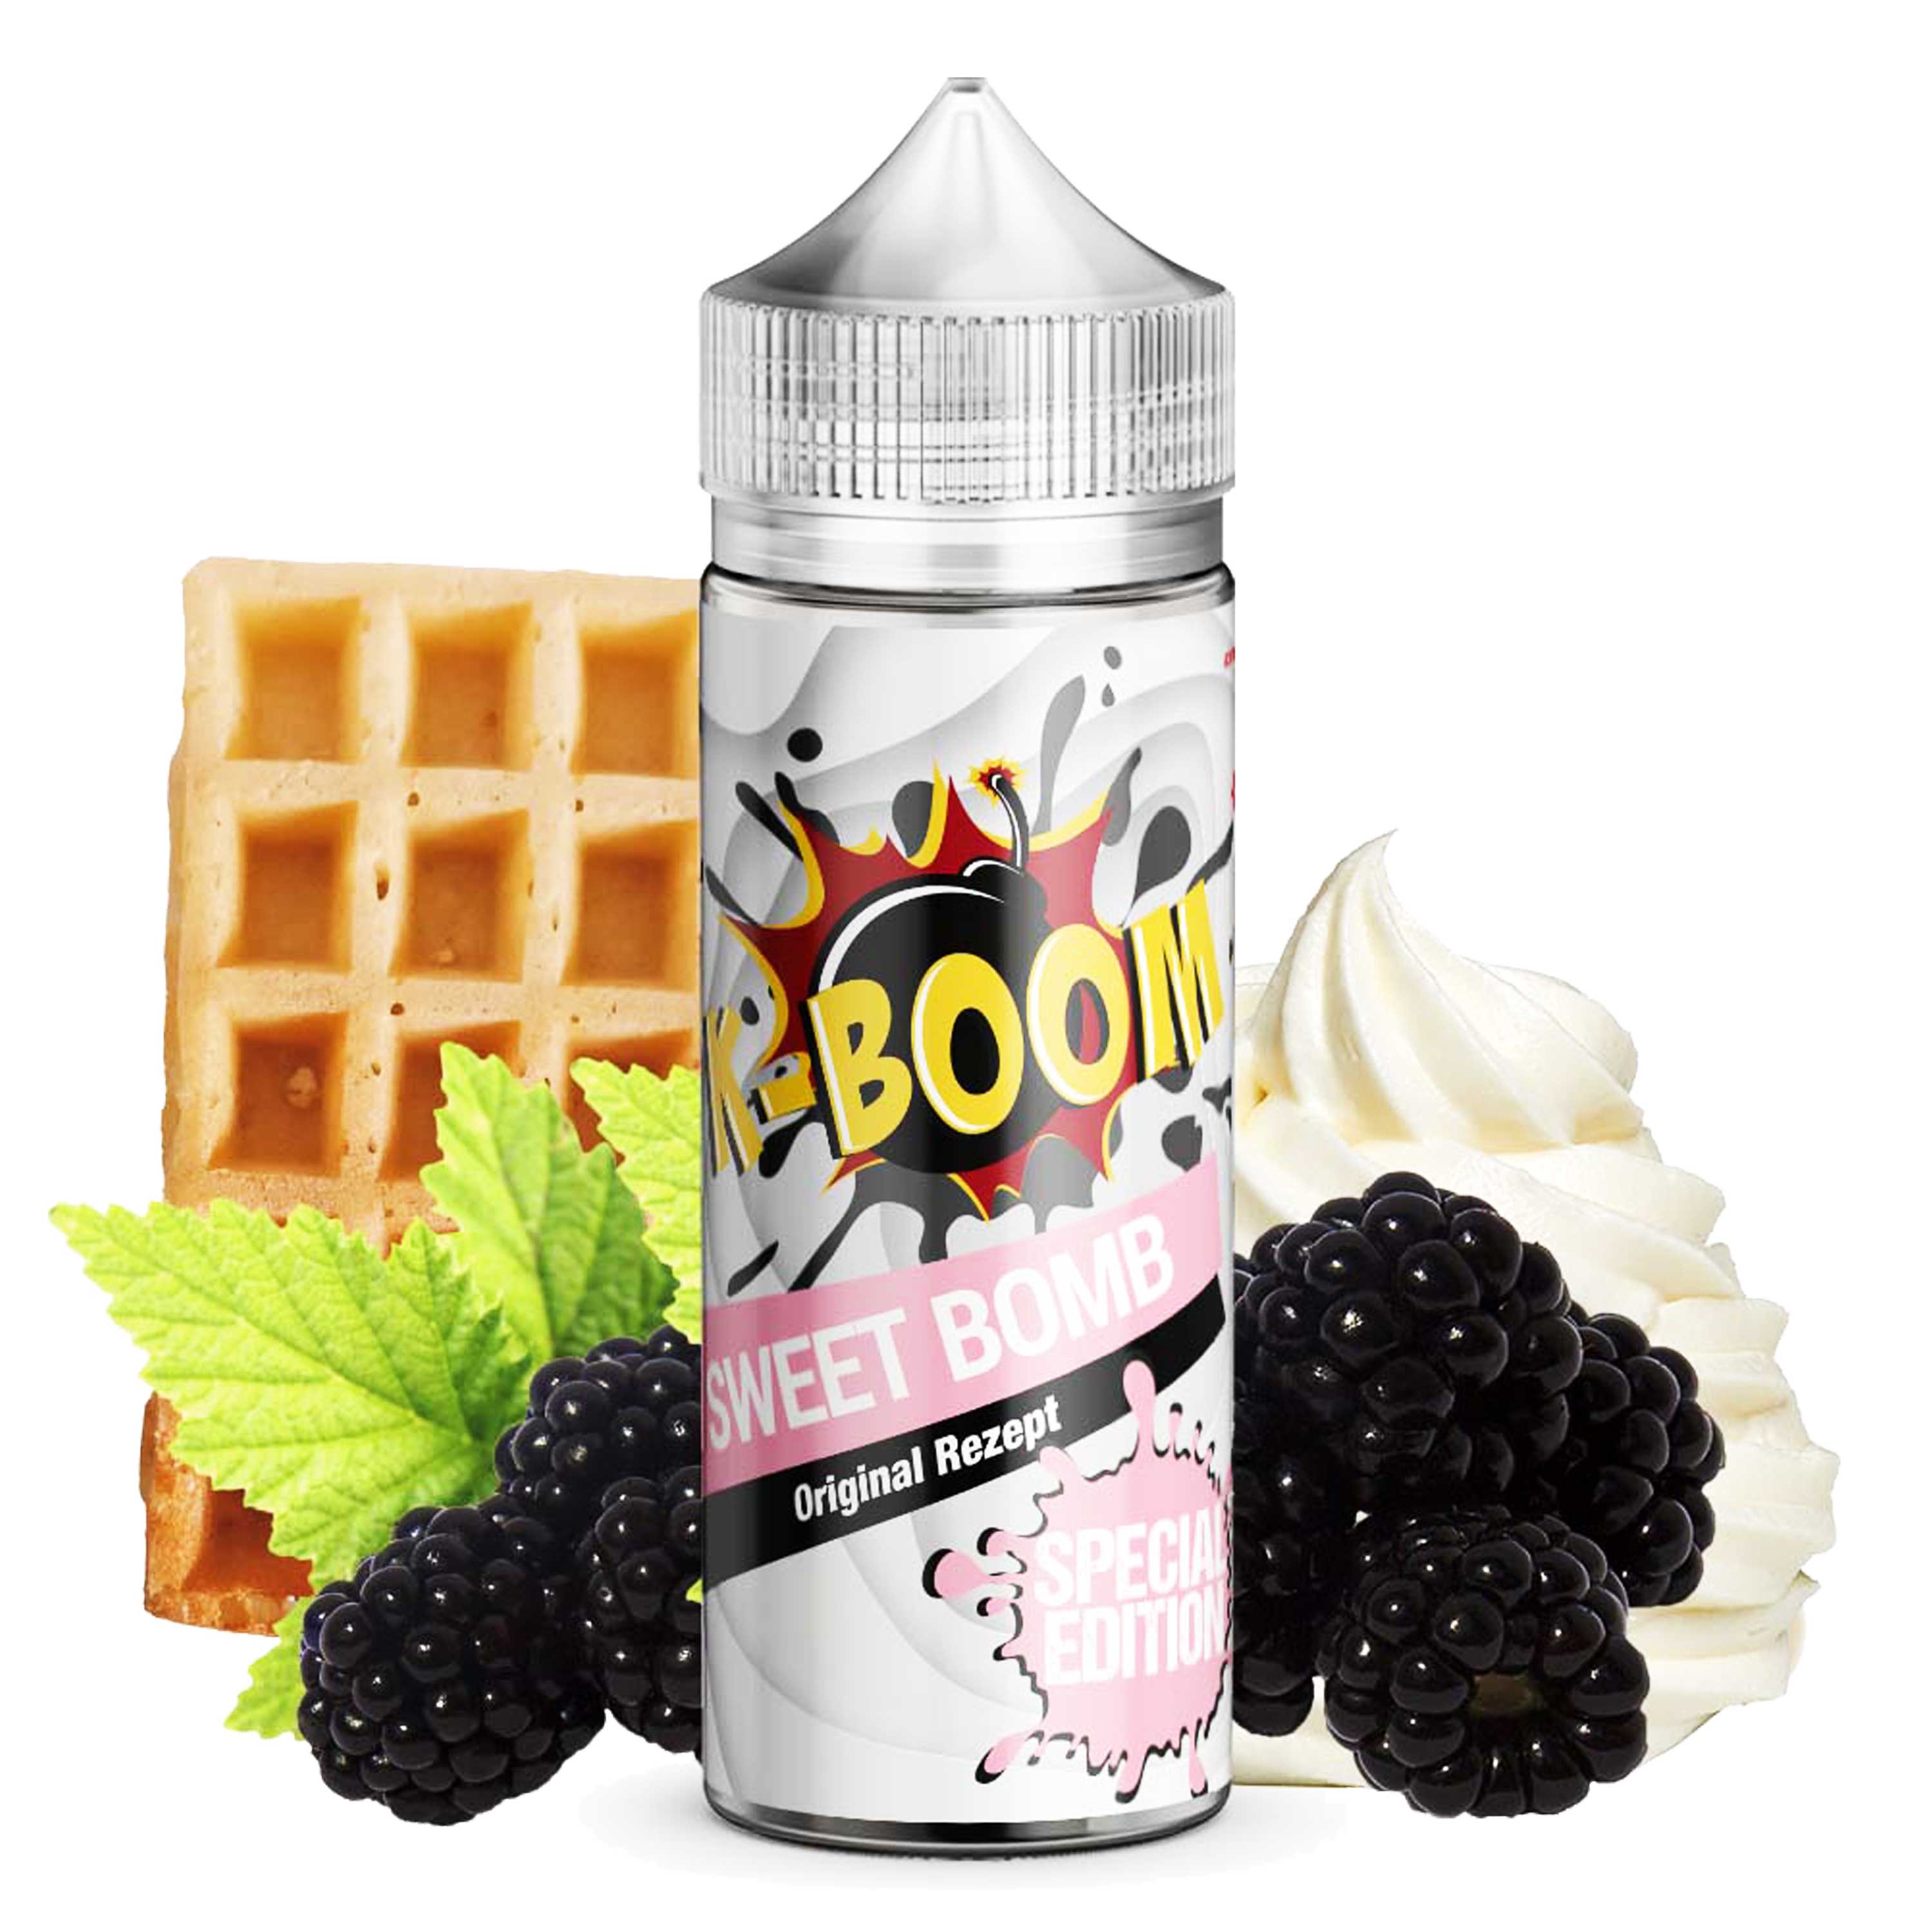 K-Boom - Special Edition - Sweet Bomb (10 ml in 120 ml LF) - Longfill-Aroma